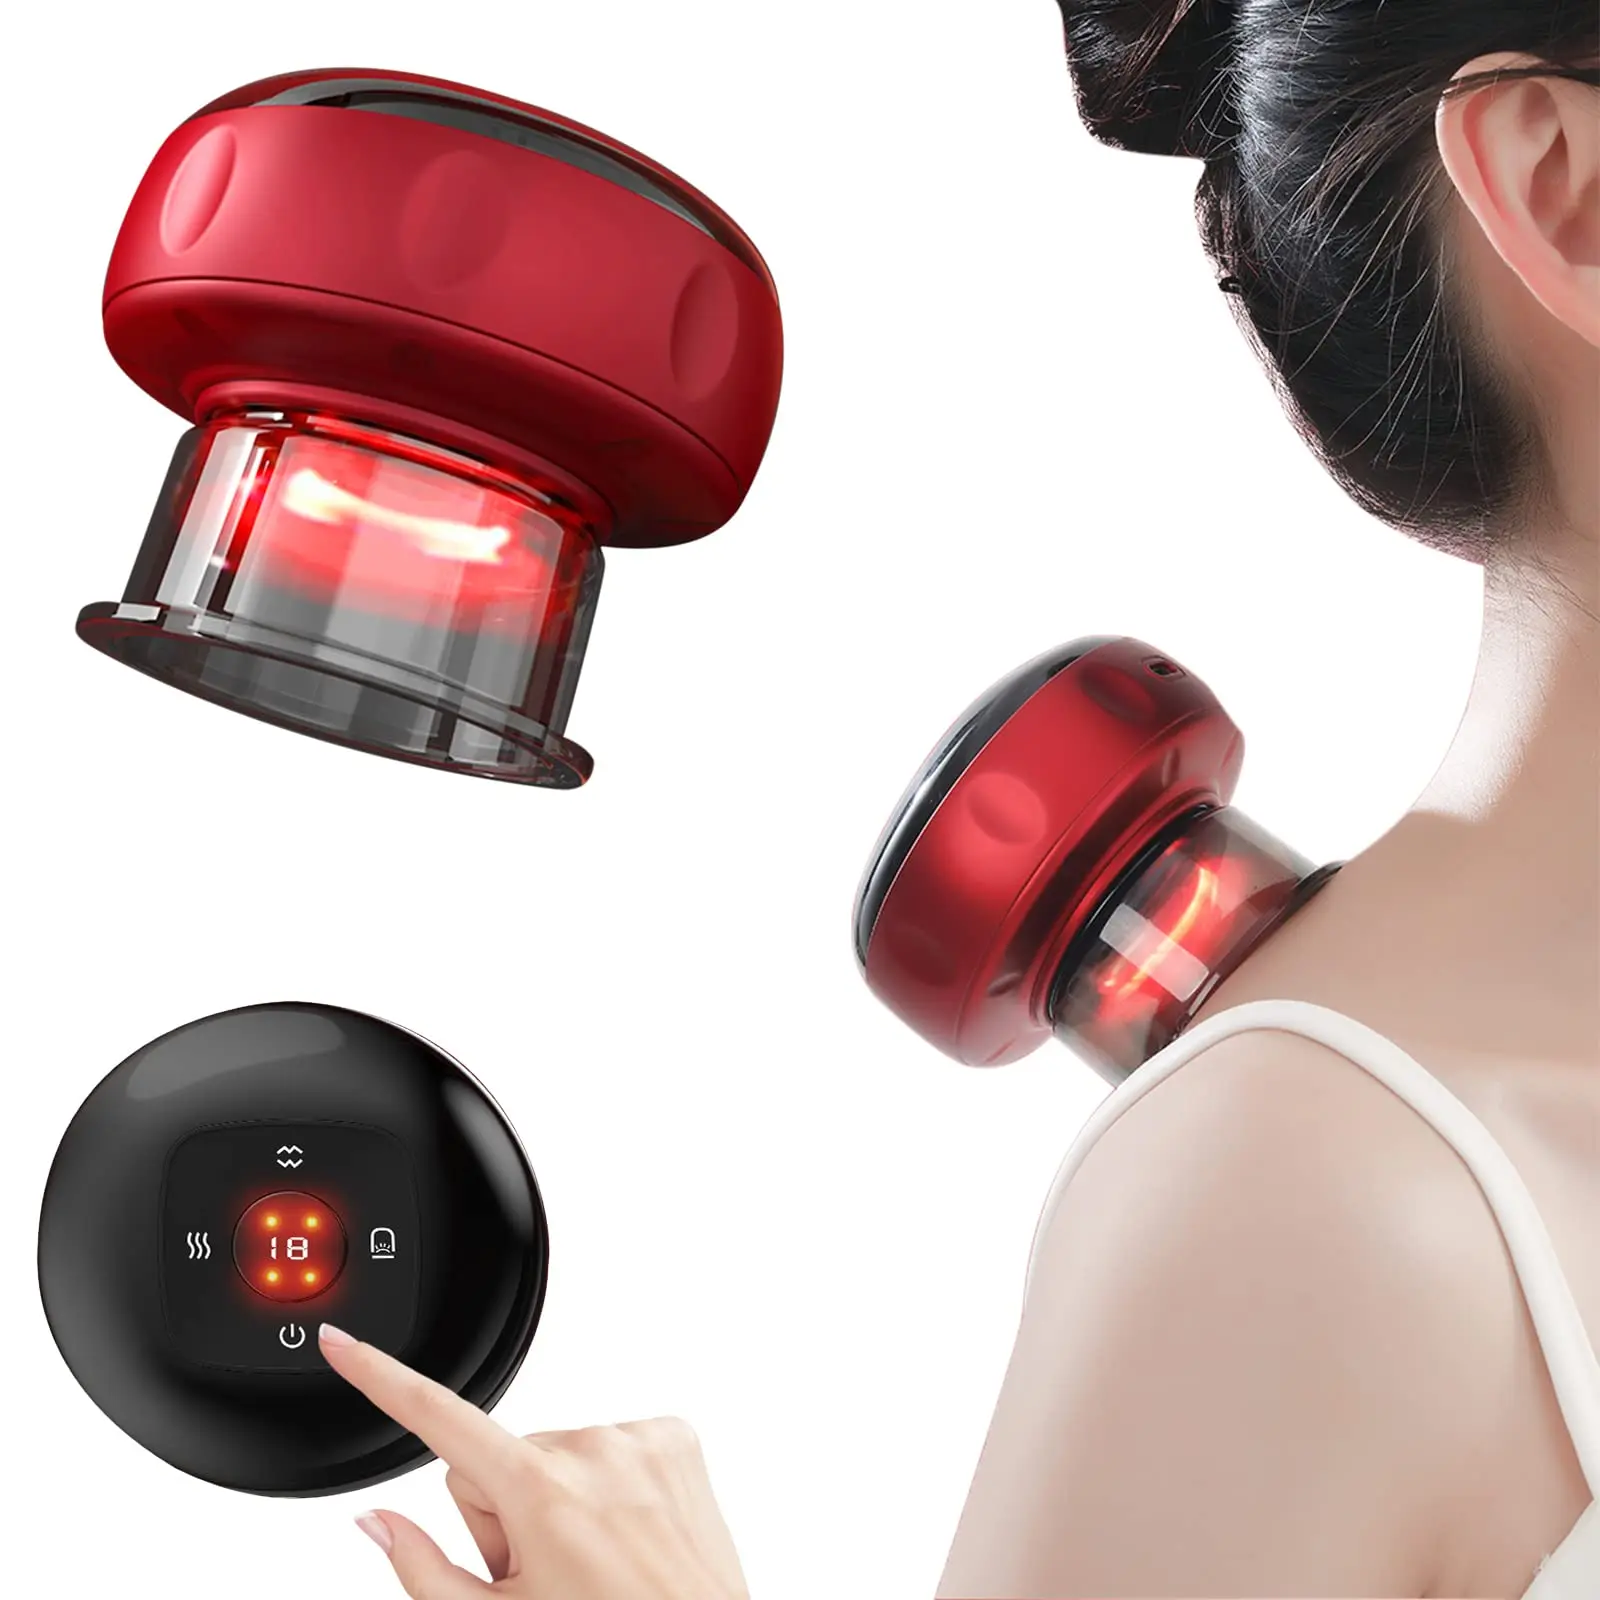 Electric Cupping Set, New Cupping Device with 12 Modes, Suitable for Neck, Shoulder and Back Massage, Scraping and Other Purpose